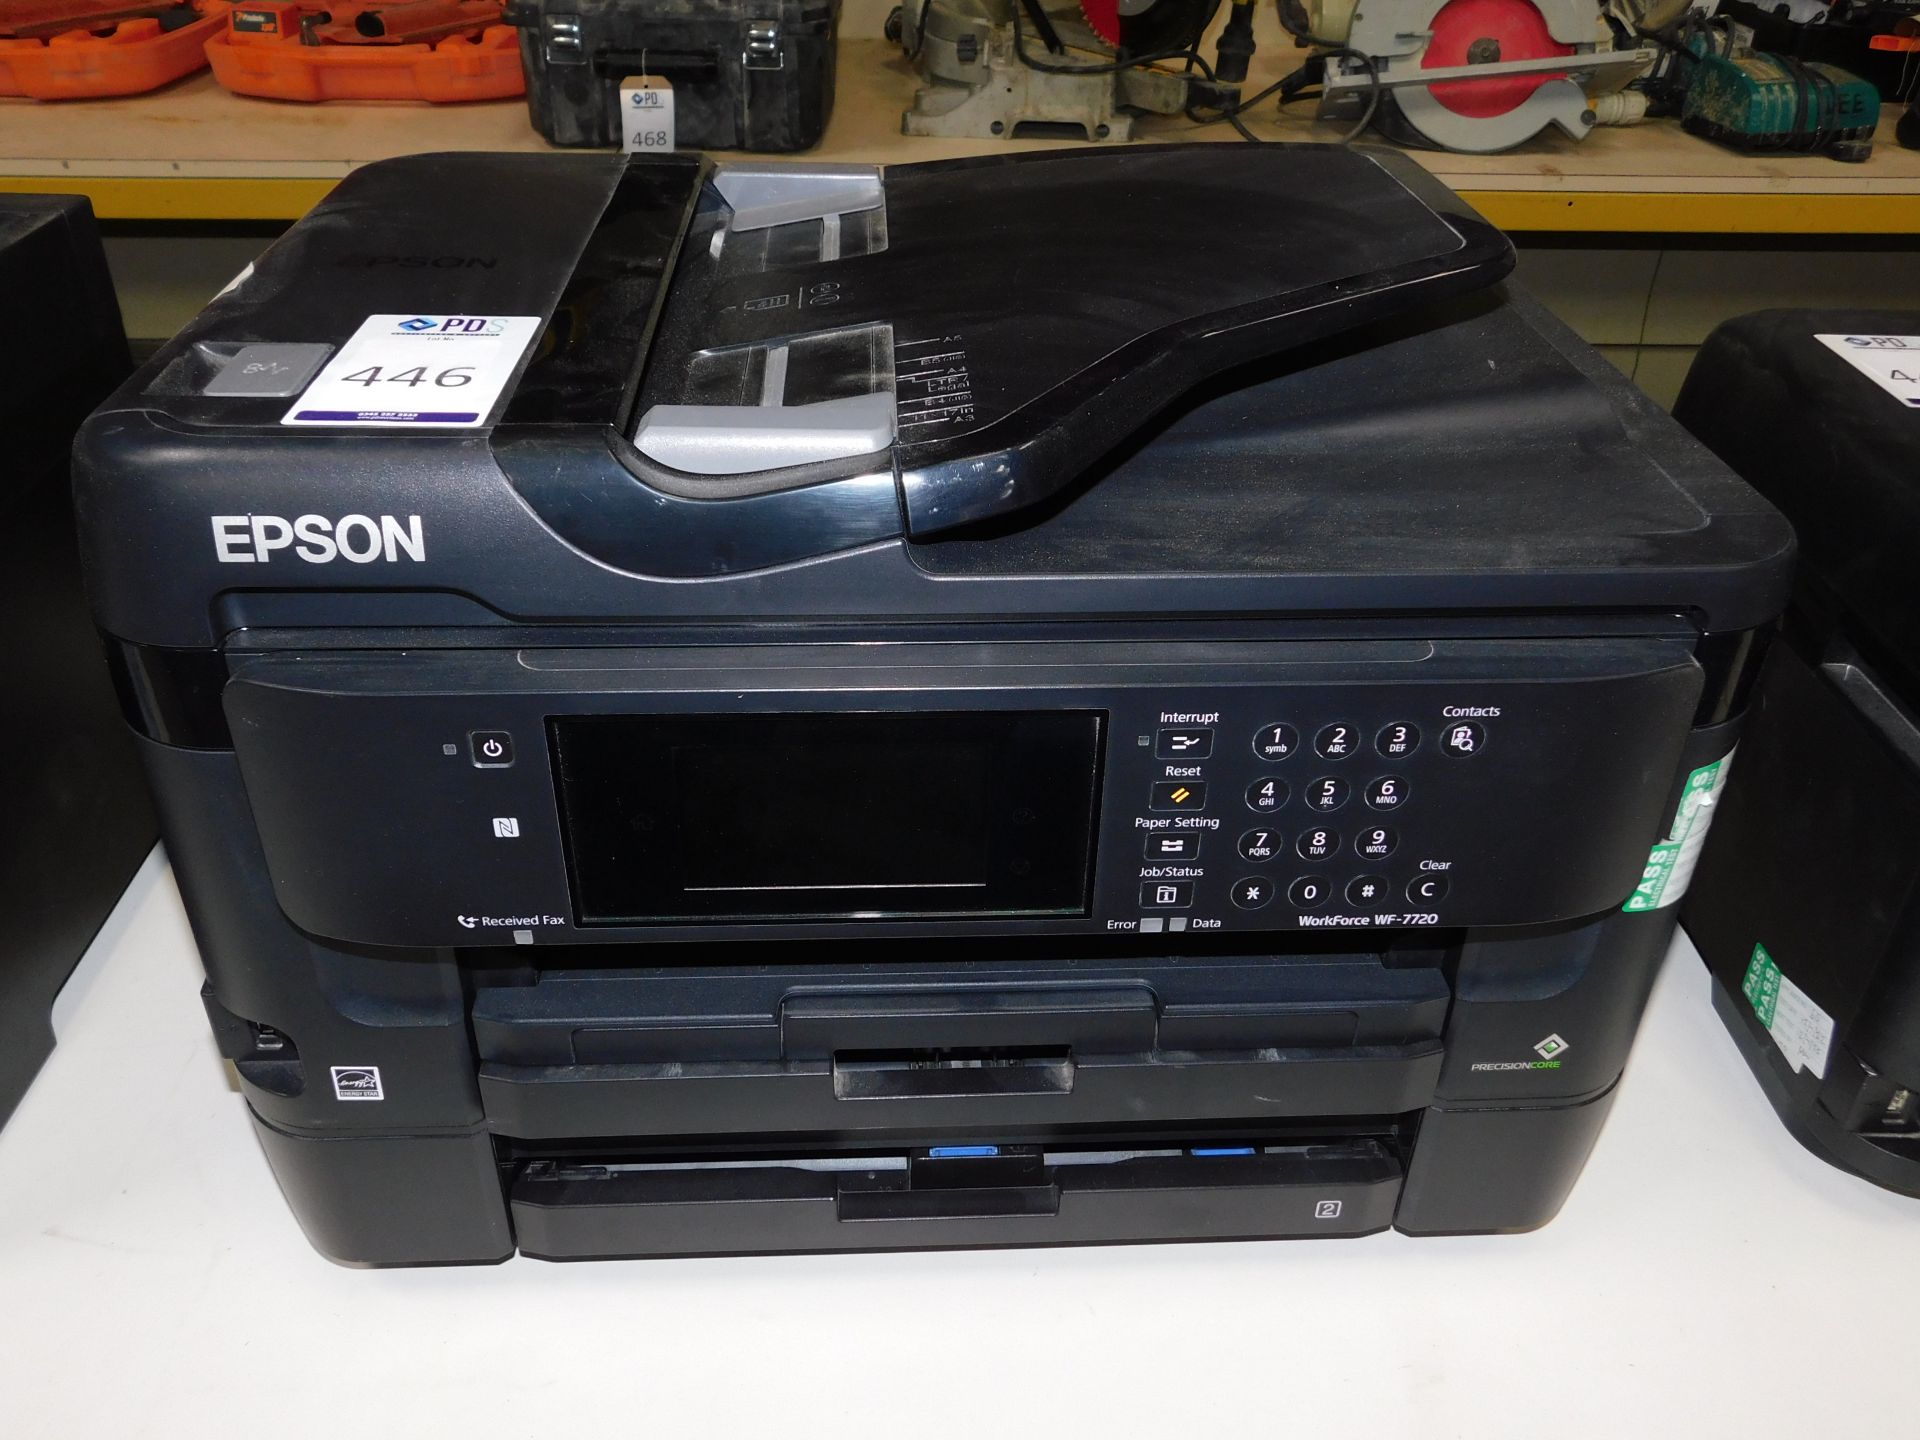 Epson WorkForce WF-7720 C443A Printer, Serial Number X464002006 (Location Brentwood. Please Refer to